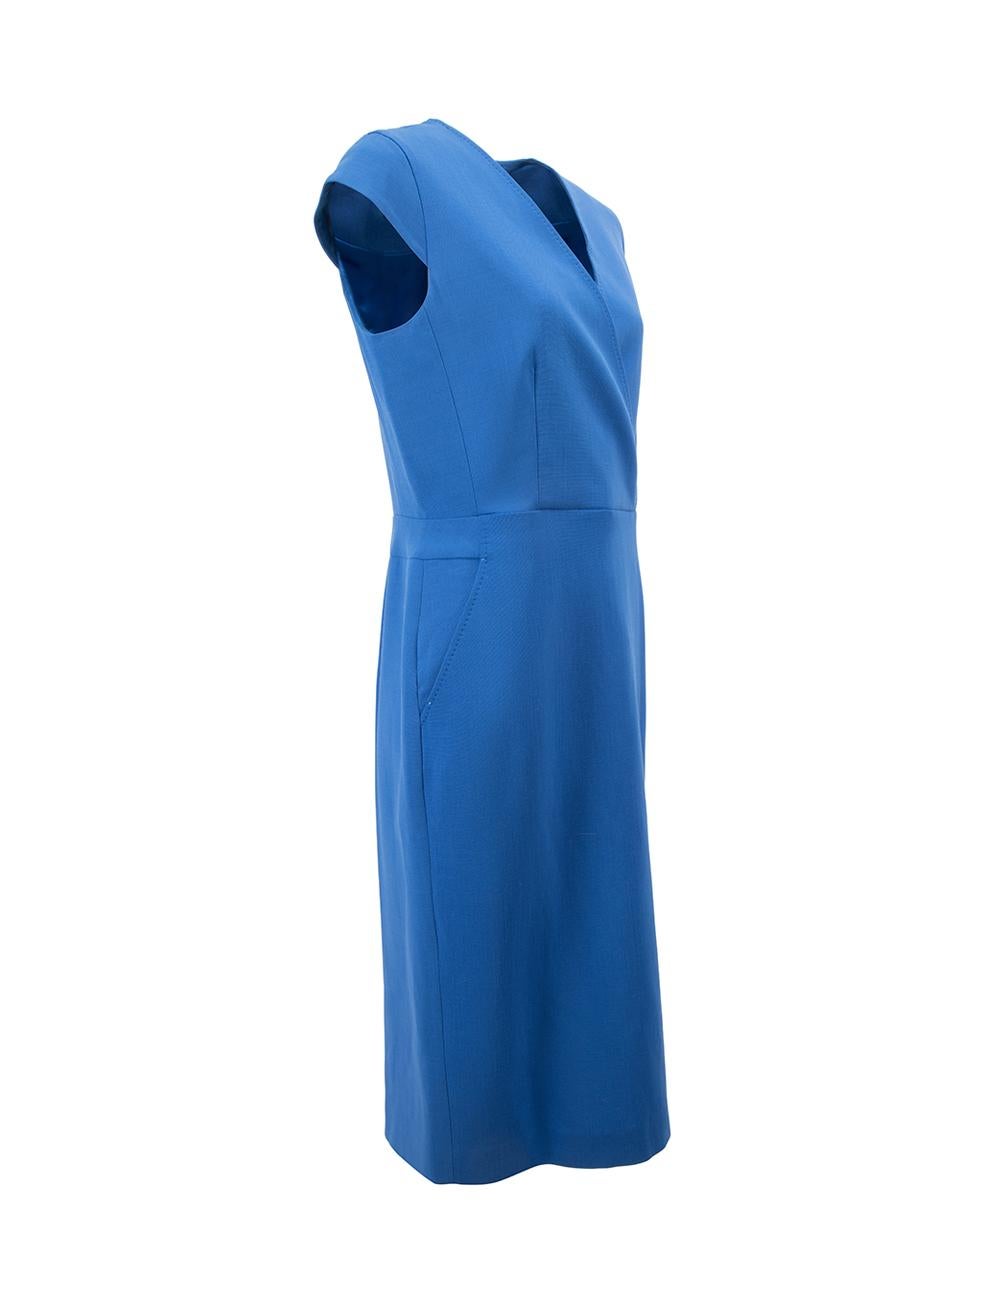 CONDITION is Never worn, with tags. No visible wear to dress is evident on this new Max Mara designer resale item.



Details


Blue

Wool

Knee length dress

V neckline

Front side pockets

Back zip closure





Made in Italy



Composition

96%